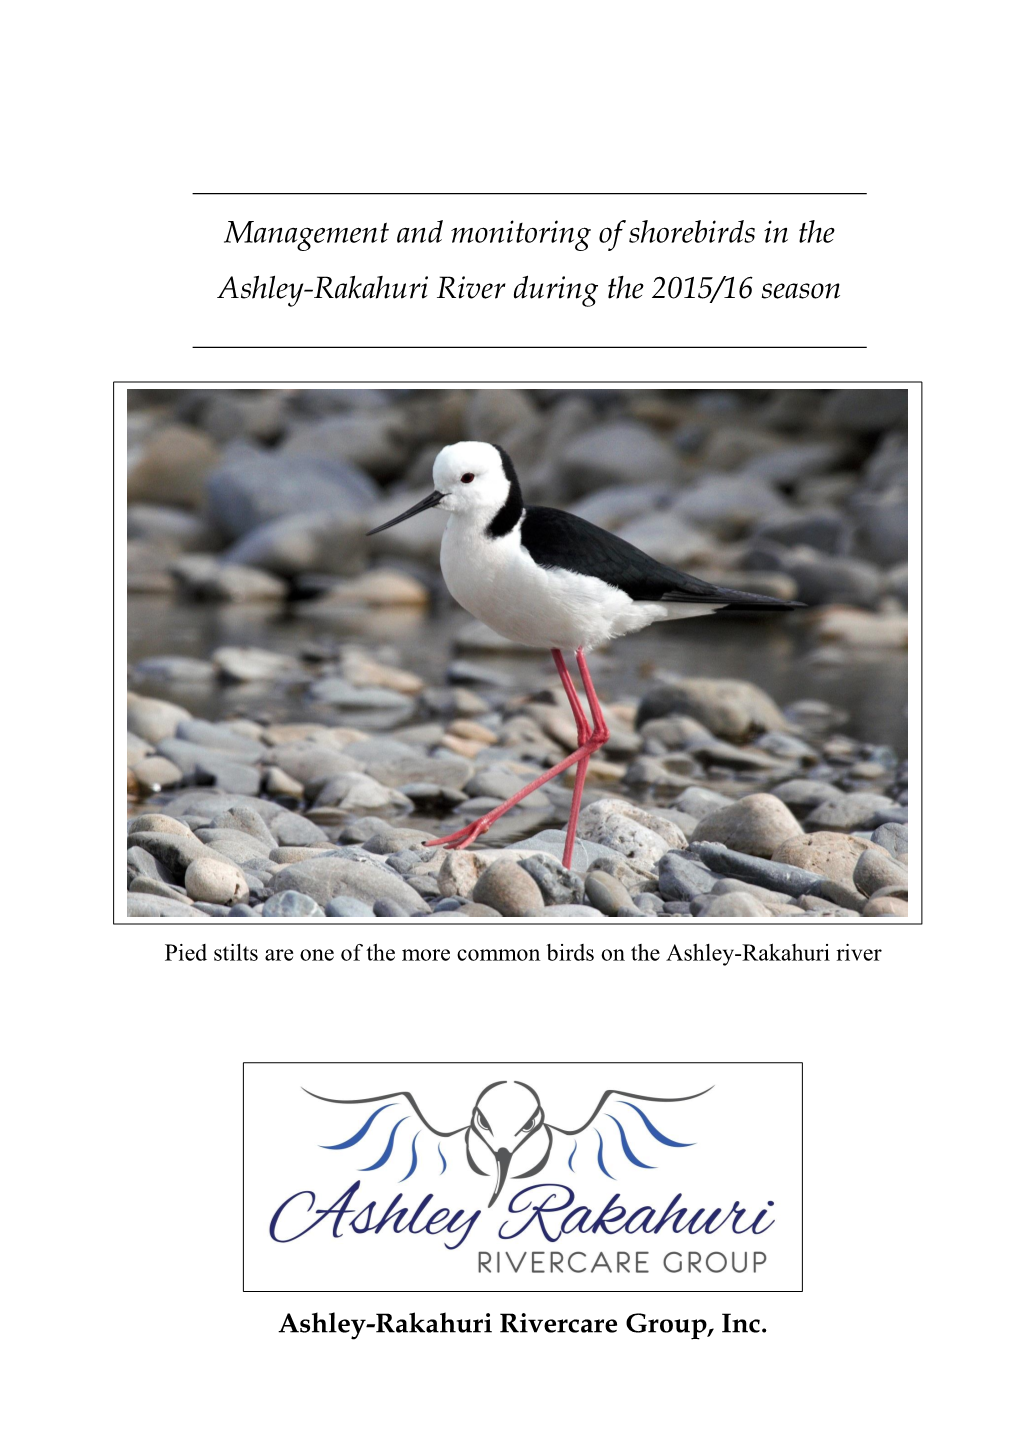 Report on Monitoring of Shorebirds In